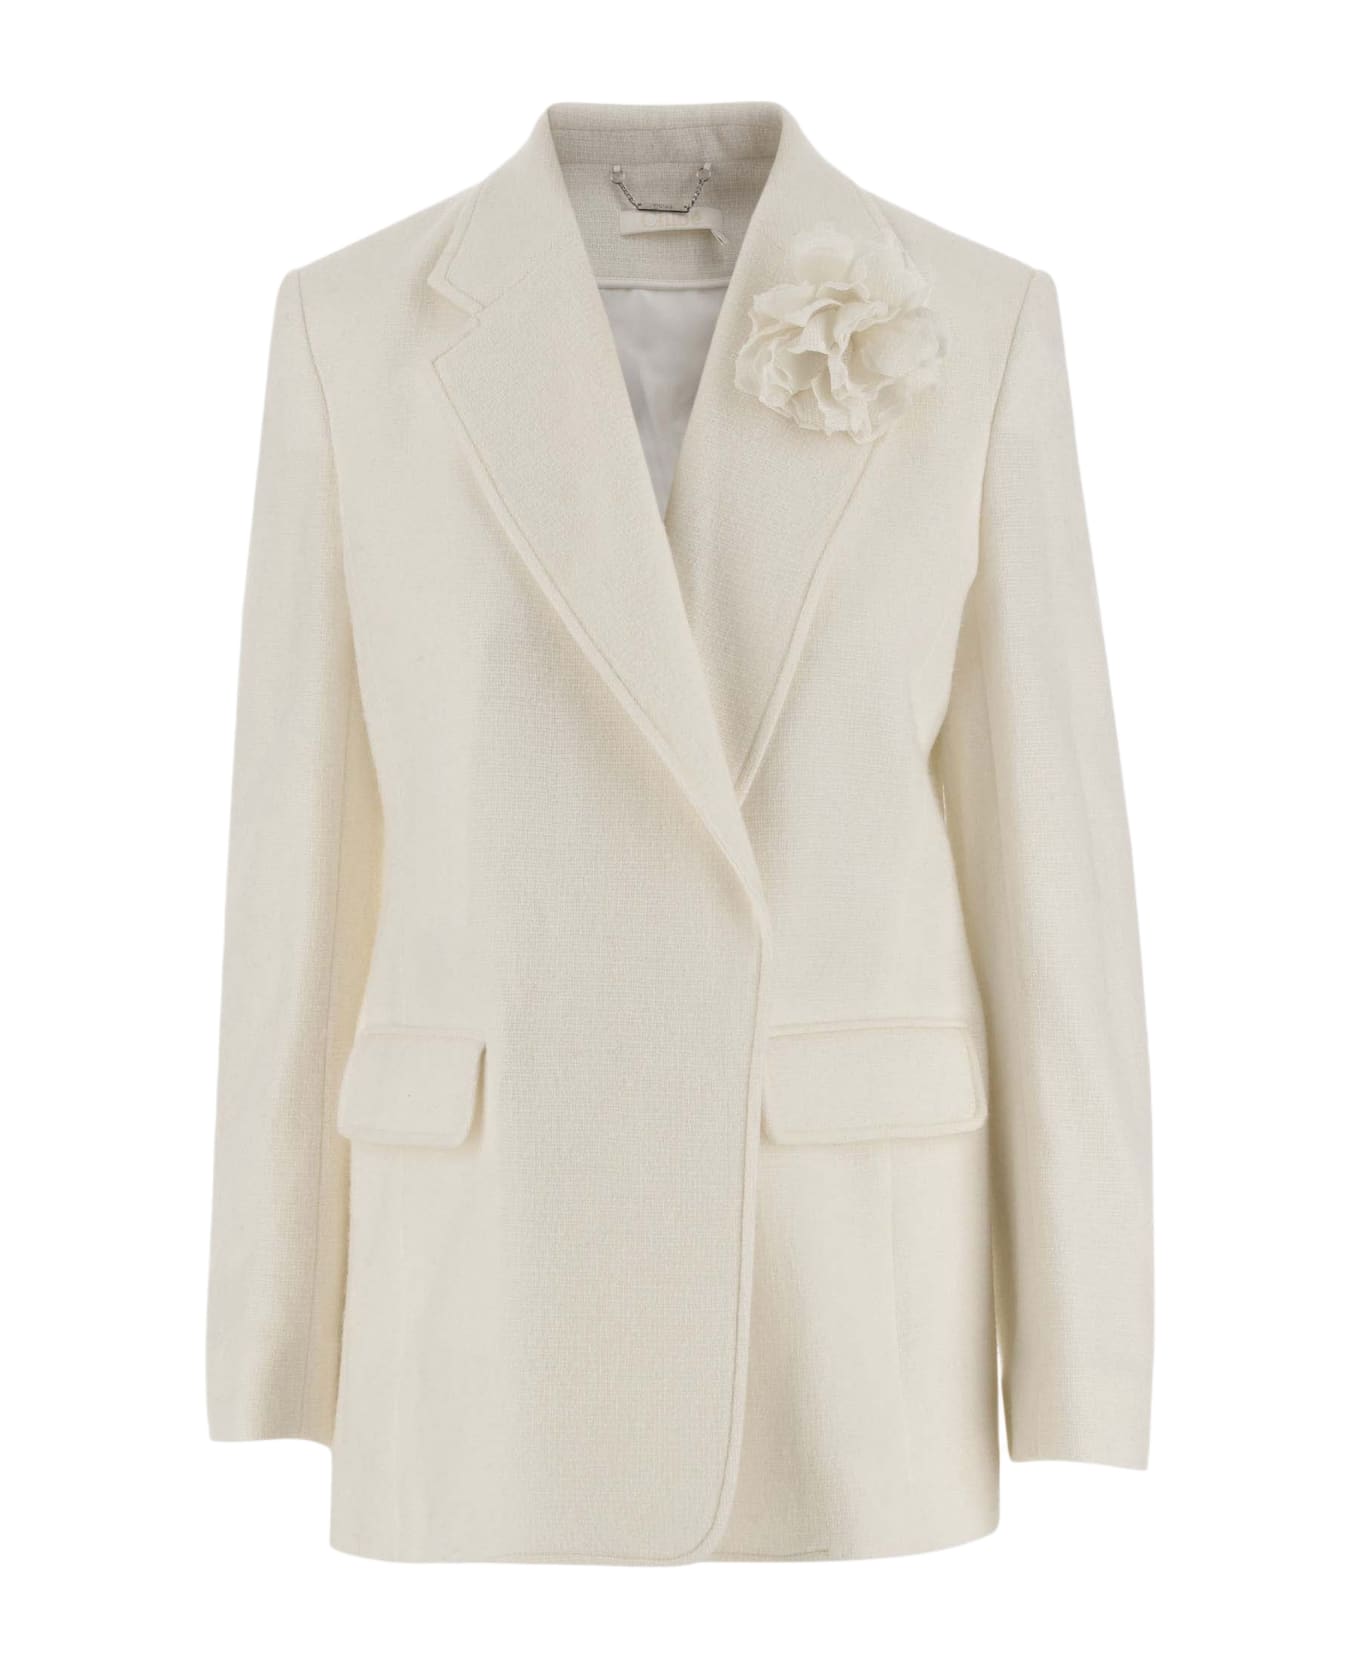 Chloé Wool And Cashmere Blend Jacket - White